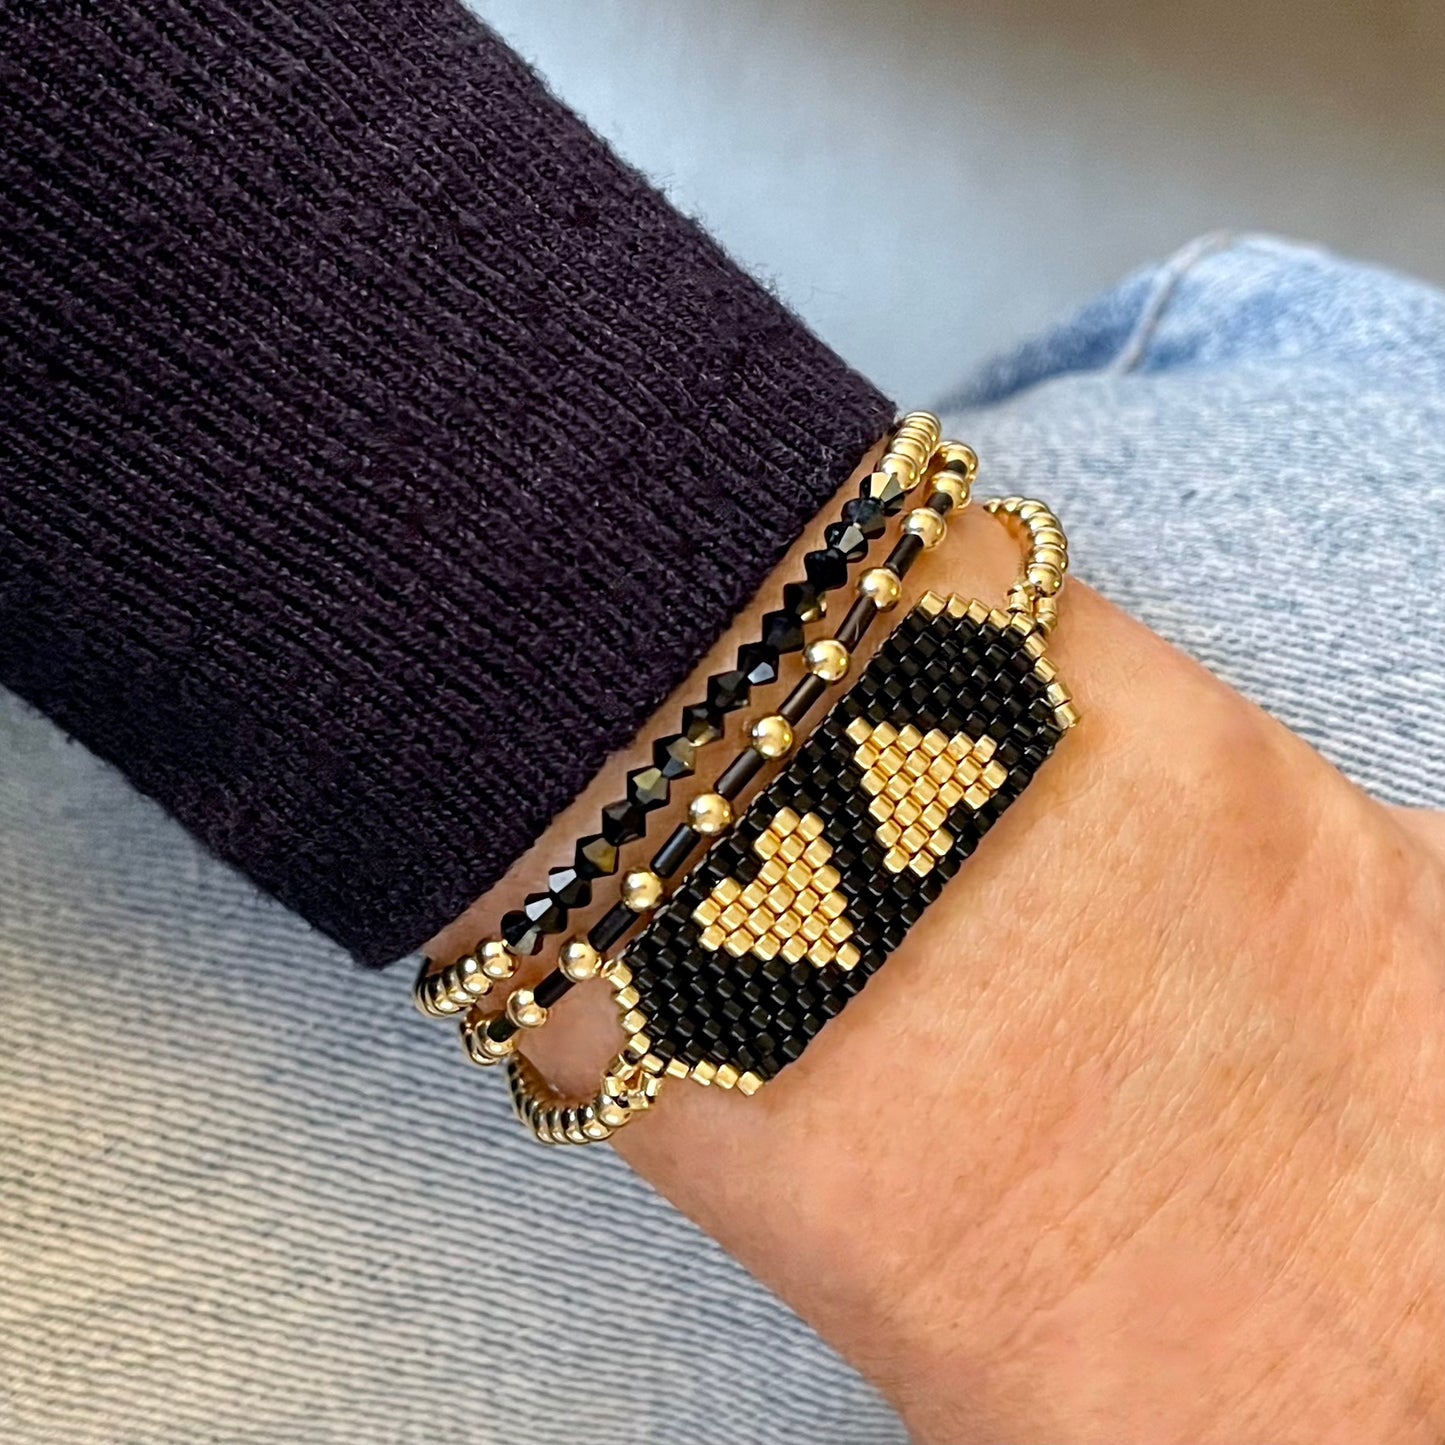 Gold and black crystal and seed bead bracelet stack with skinny stretch bracelets and heart band.